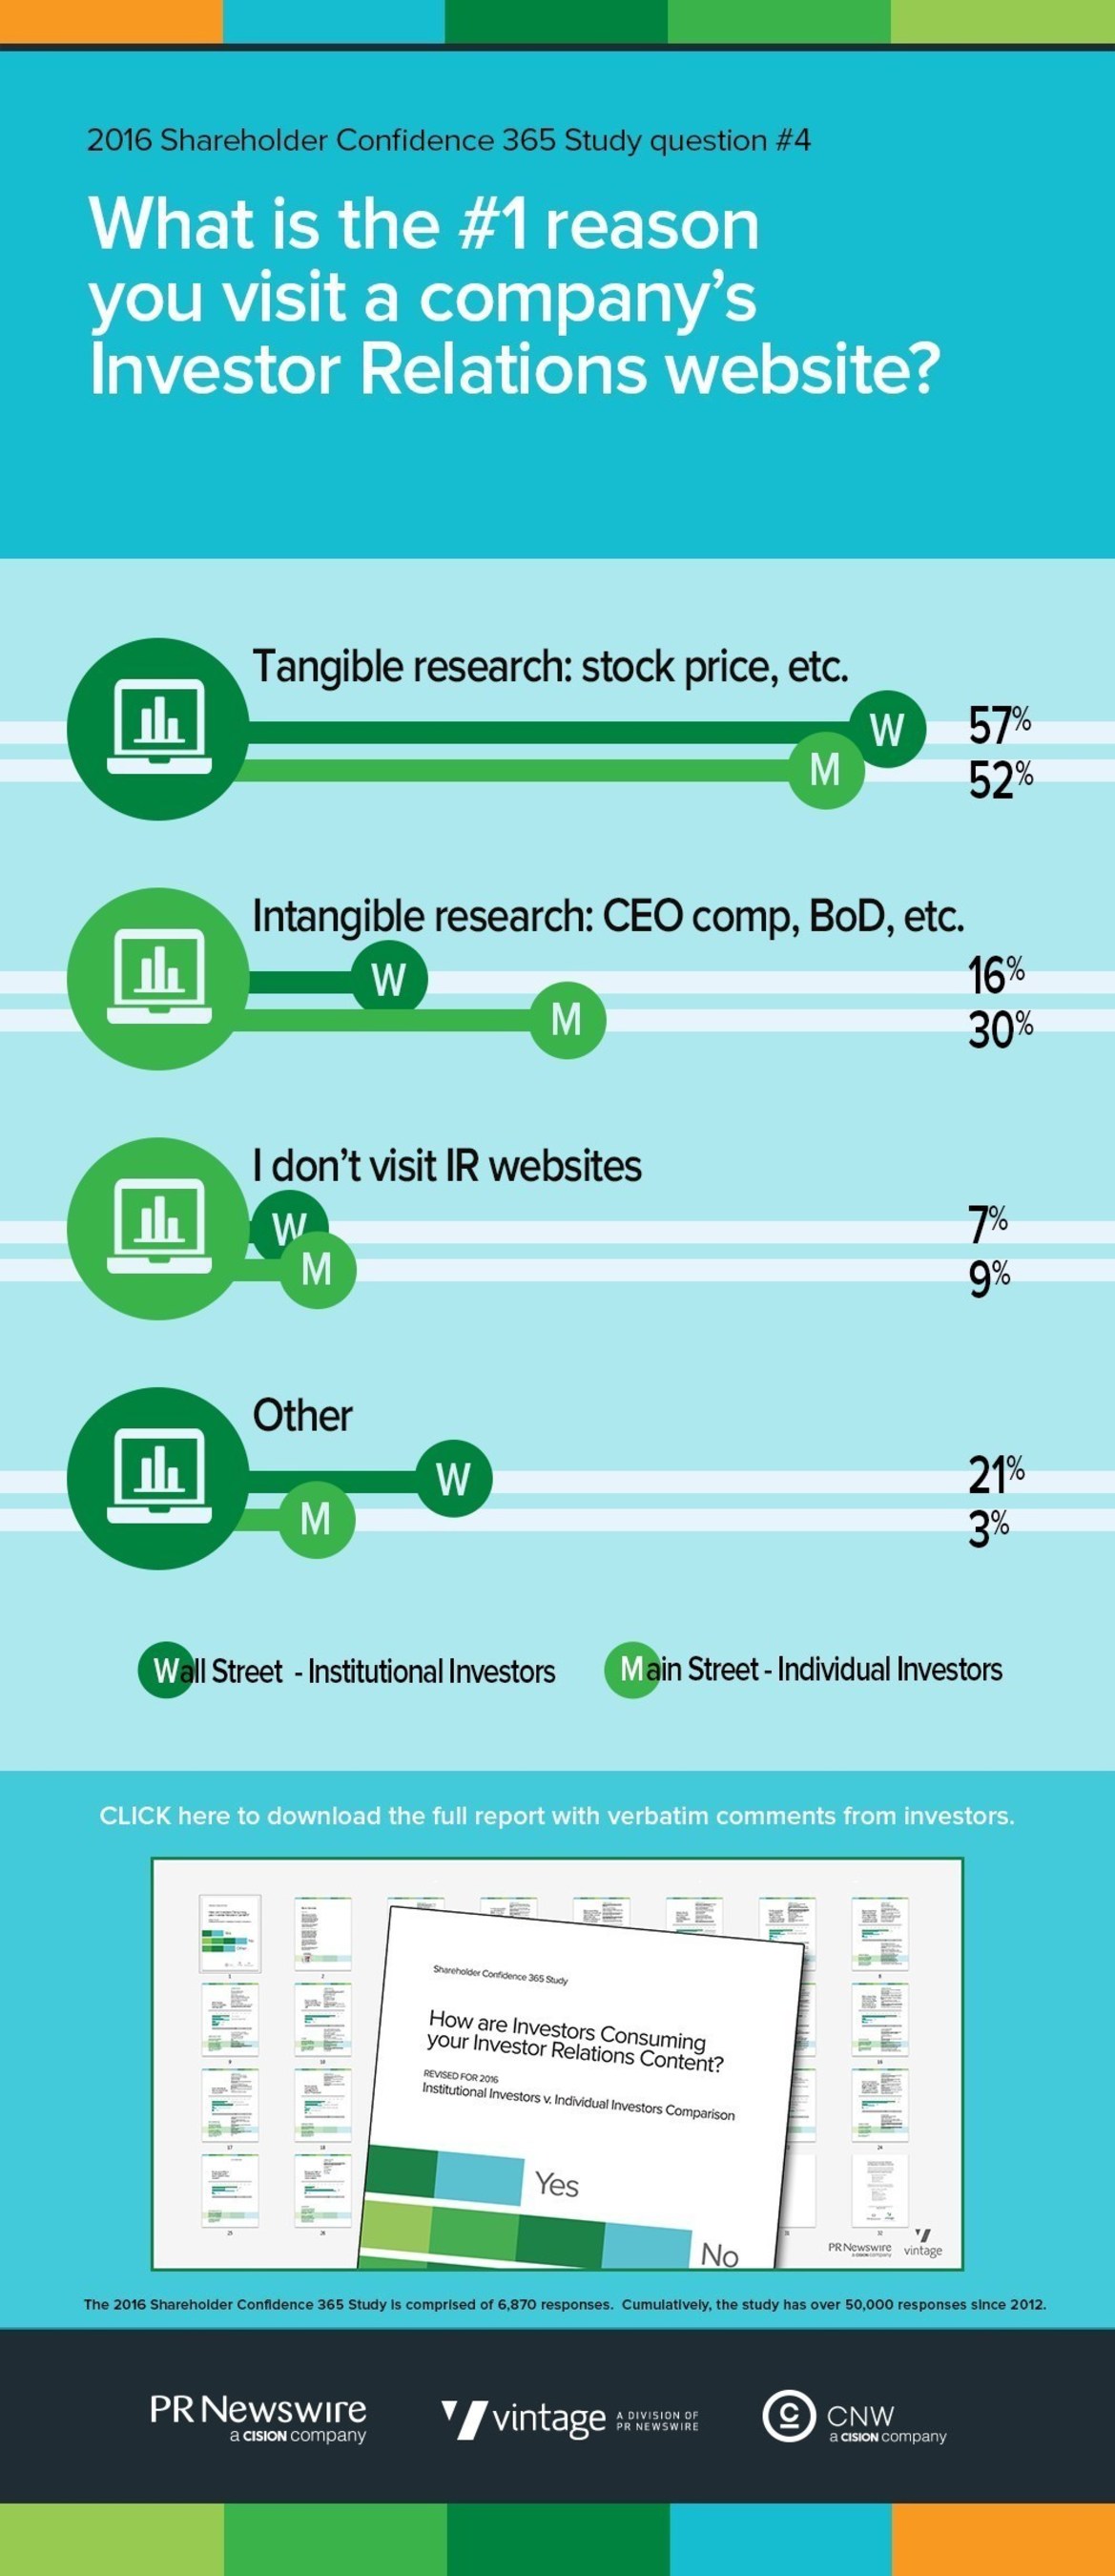 REPORT: Tangible research drives institutional investors to IR websites 3X over intangible